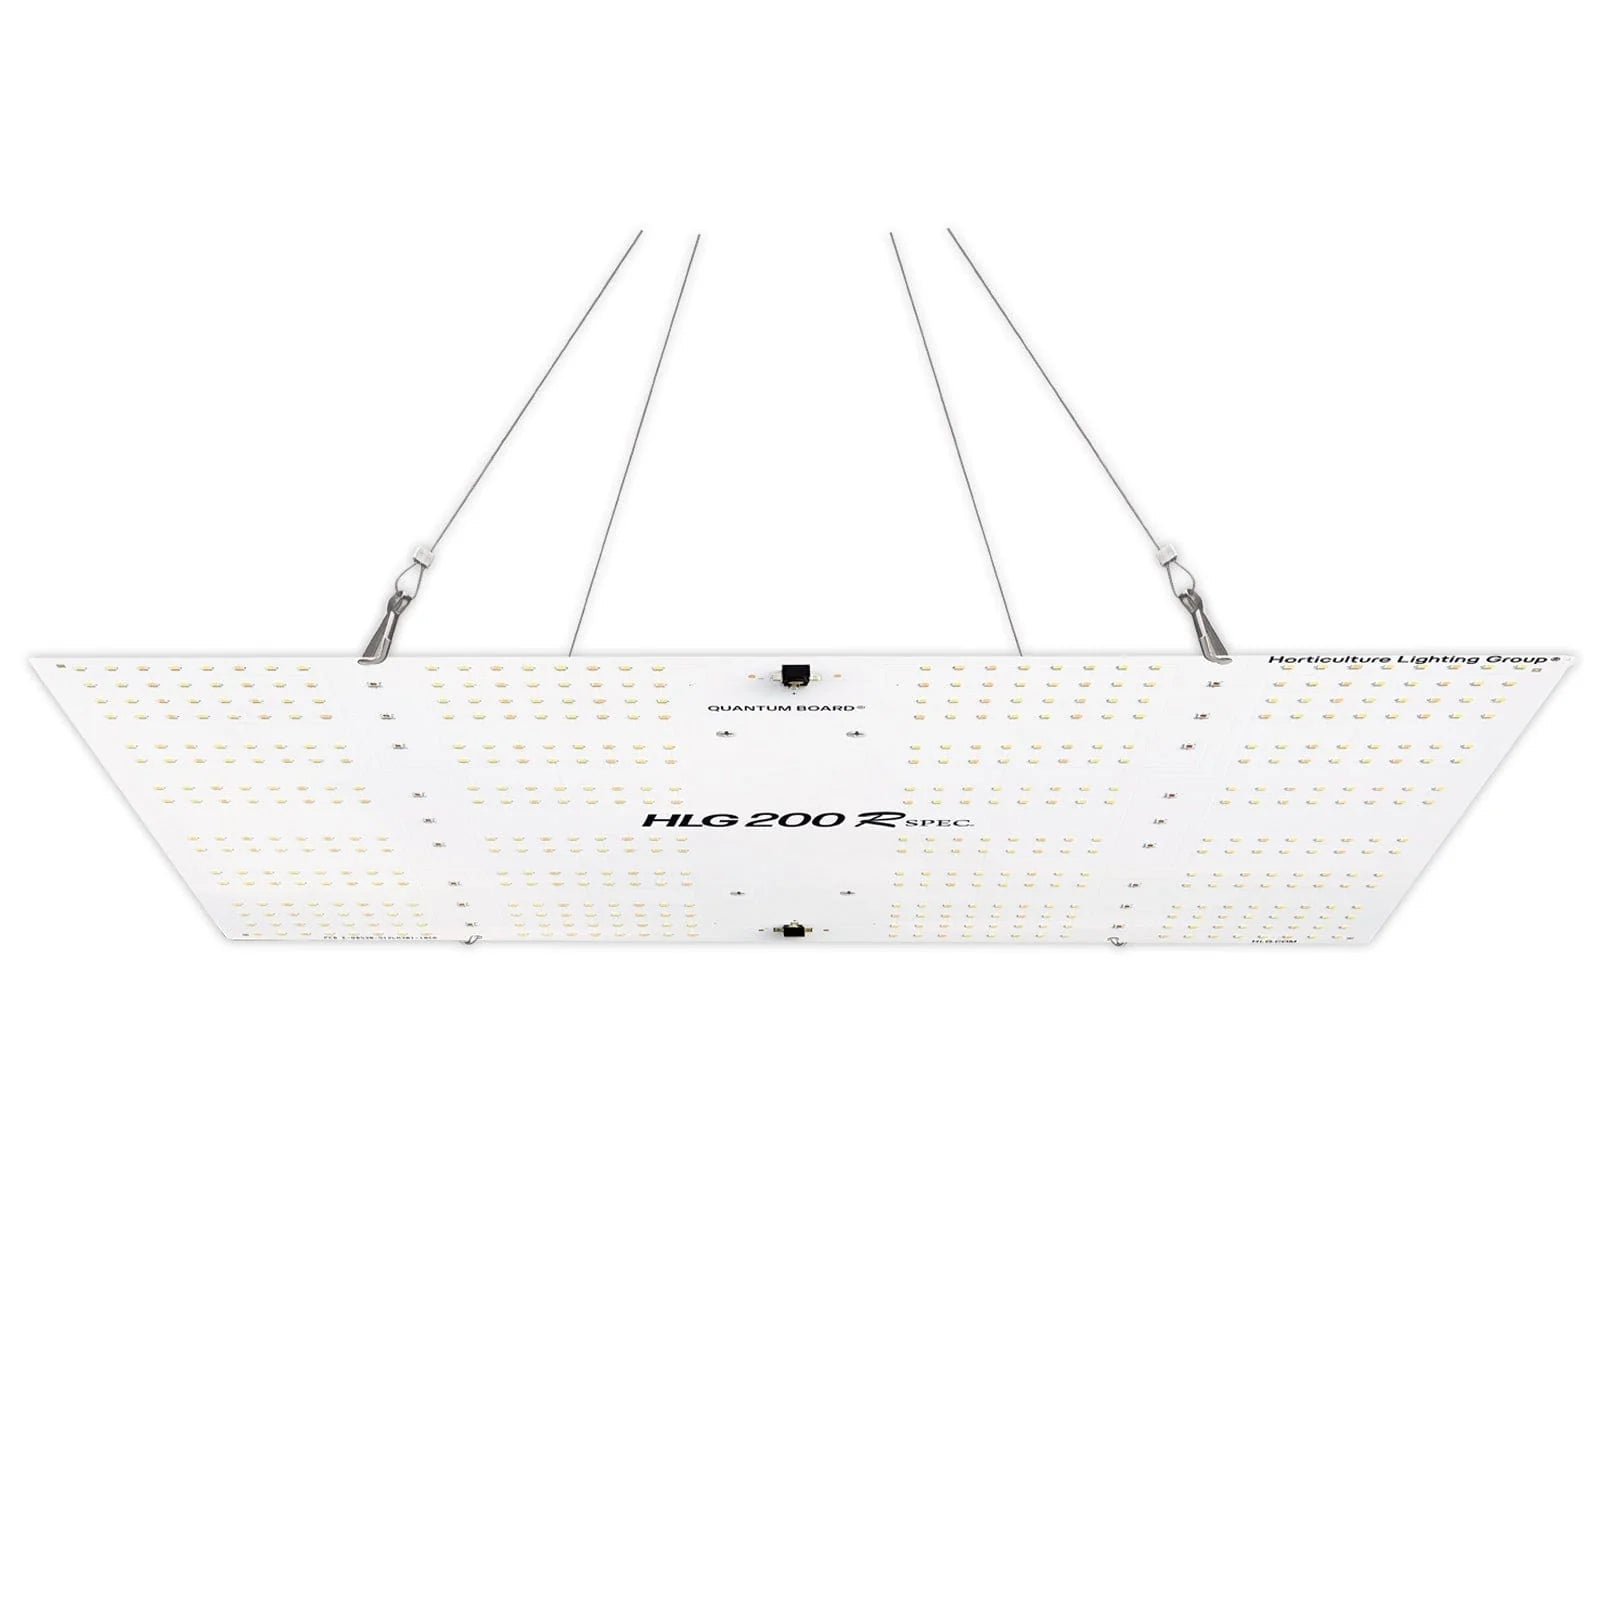 HLG 200 Rspec LED Grow Light - Horticulture Lighting Group - Happy Hydro